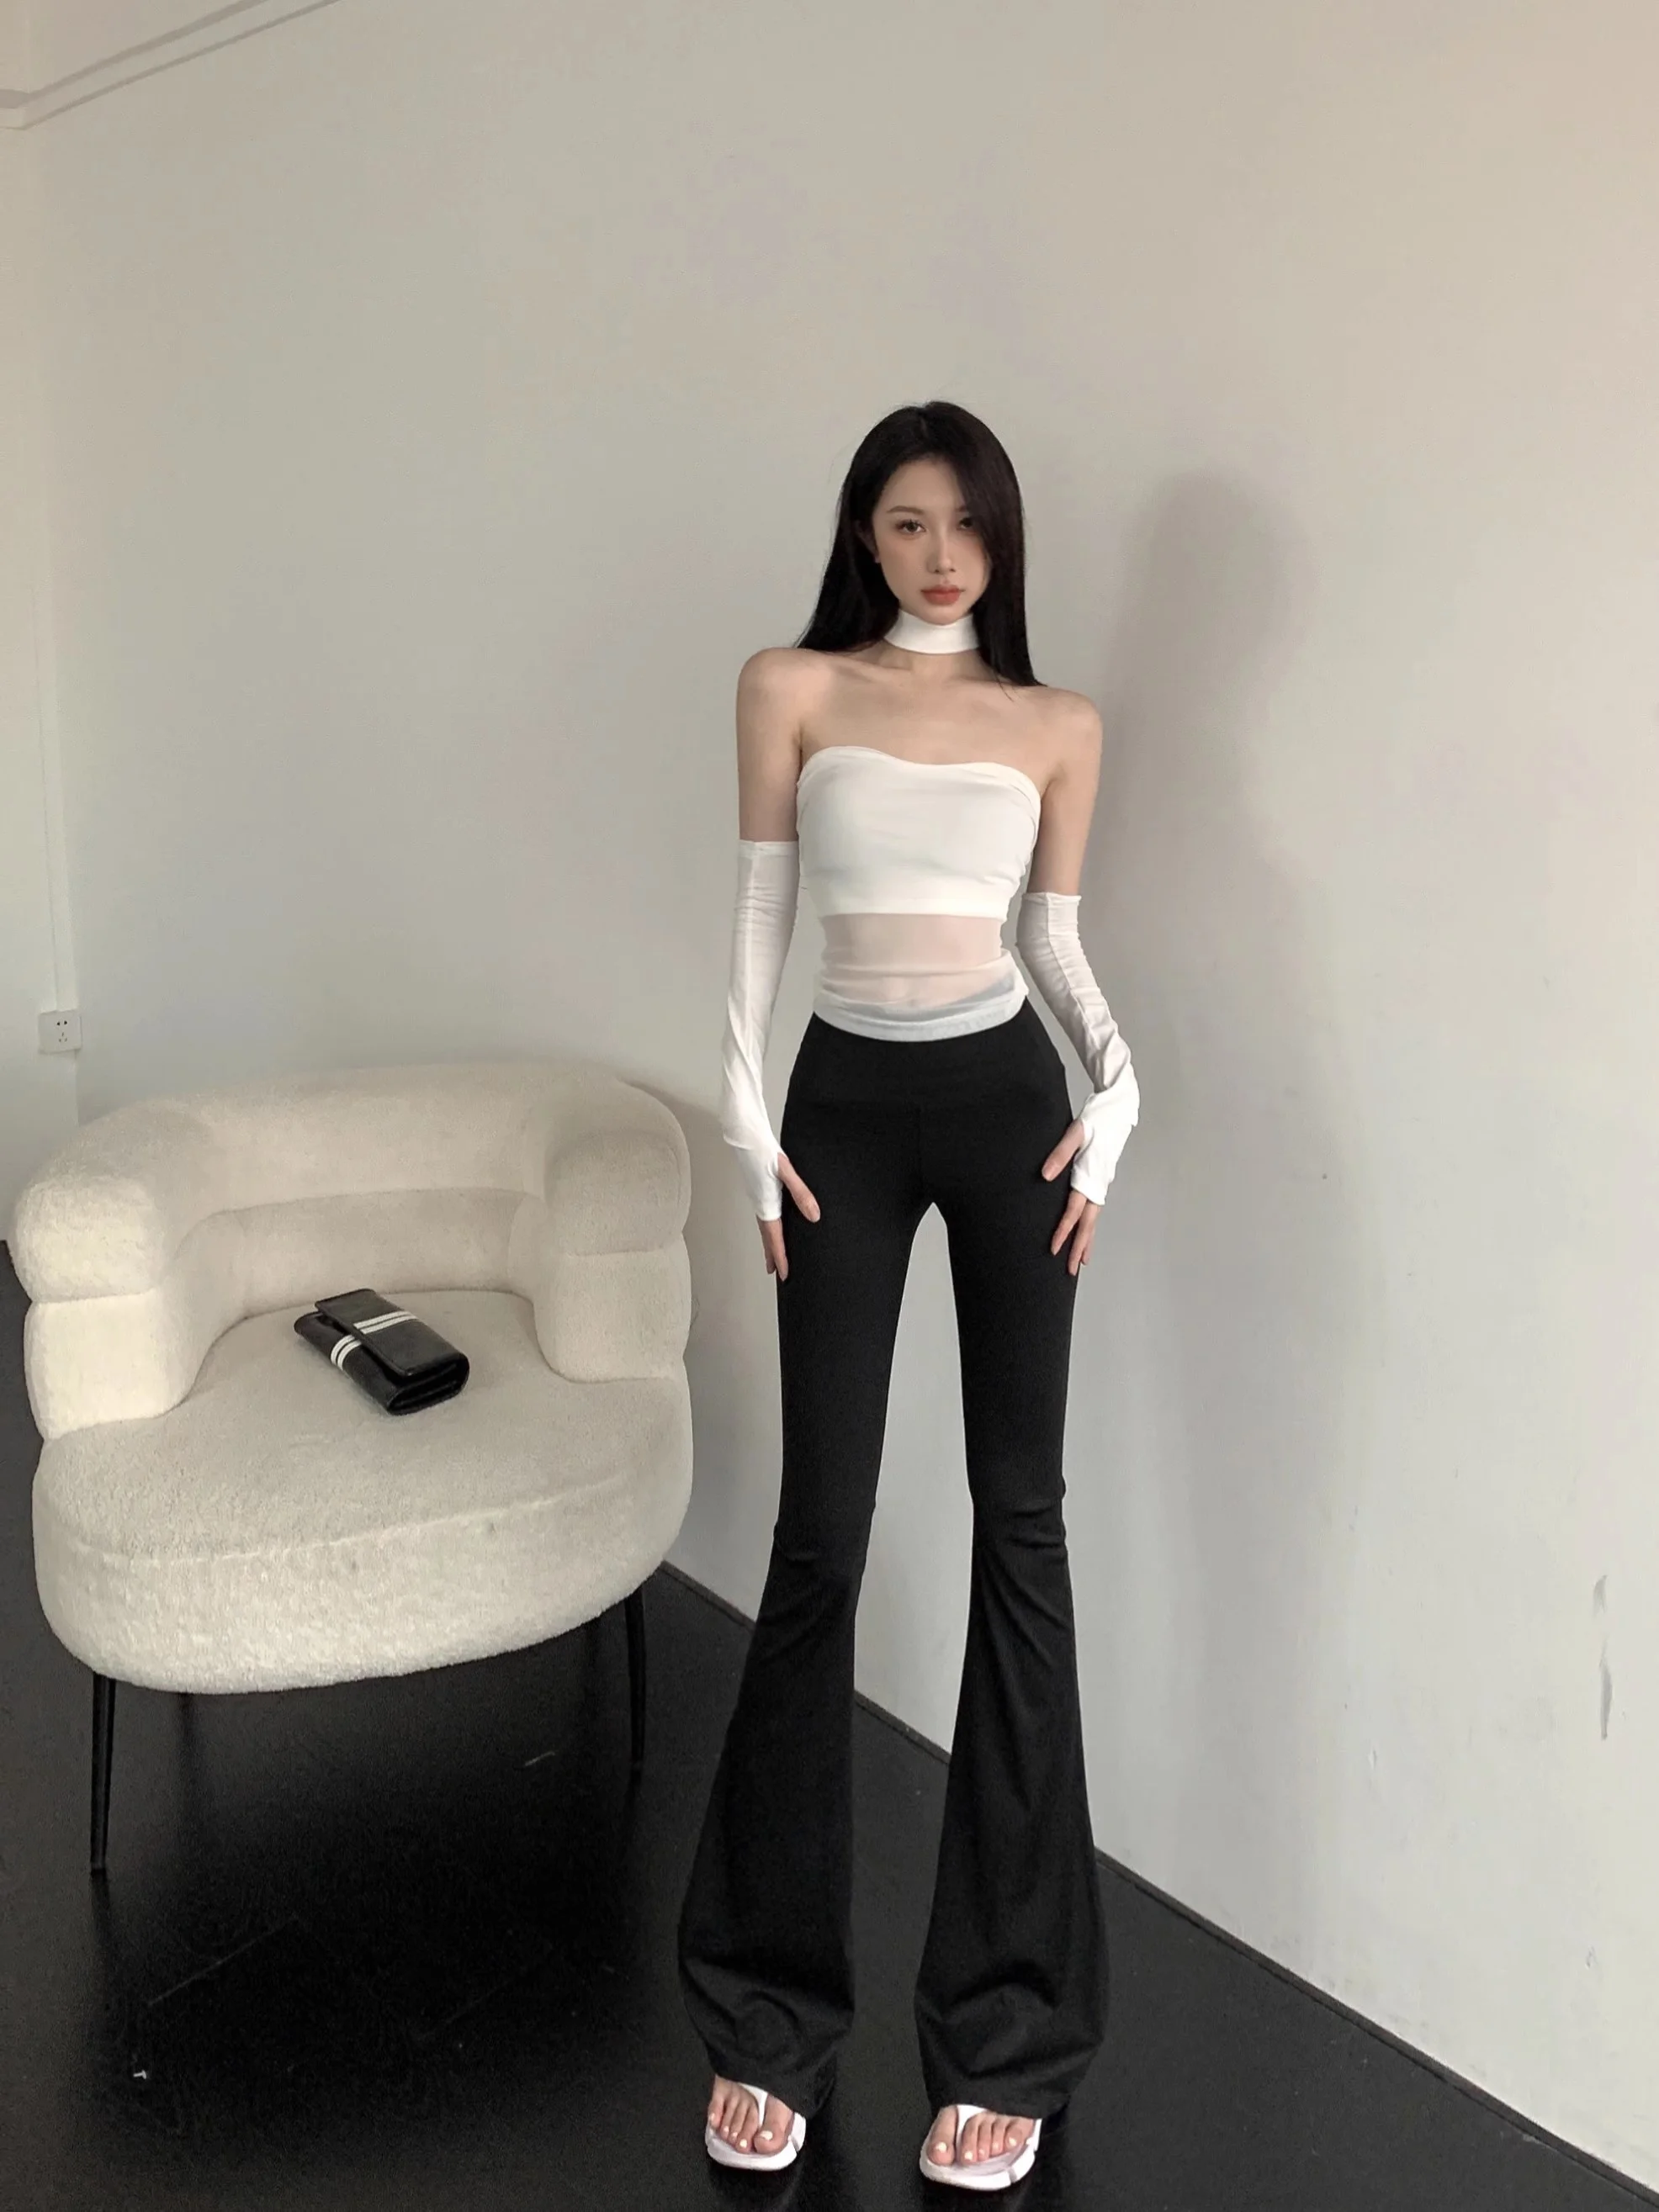 Women High Waist Pants Mesh Splice Bra Sleeve Vest Women's Summer Sexy Tight Wrap Chest Inner Crop Top Outer Wear new fashion fuchsia mesh pleated design bandage dress with gloves sexy chest wrapping tight fashion party club dress vestidos